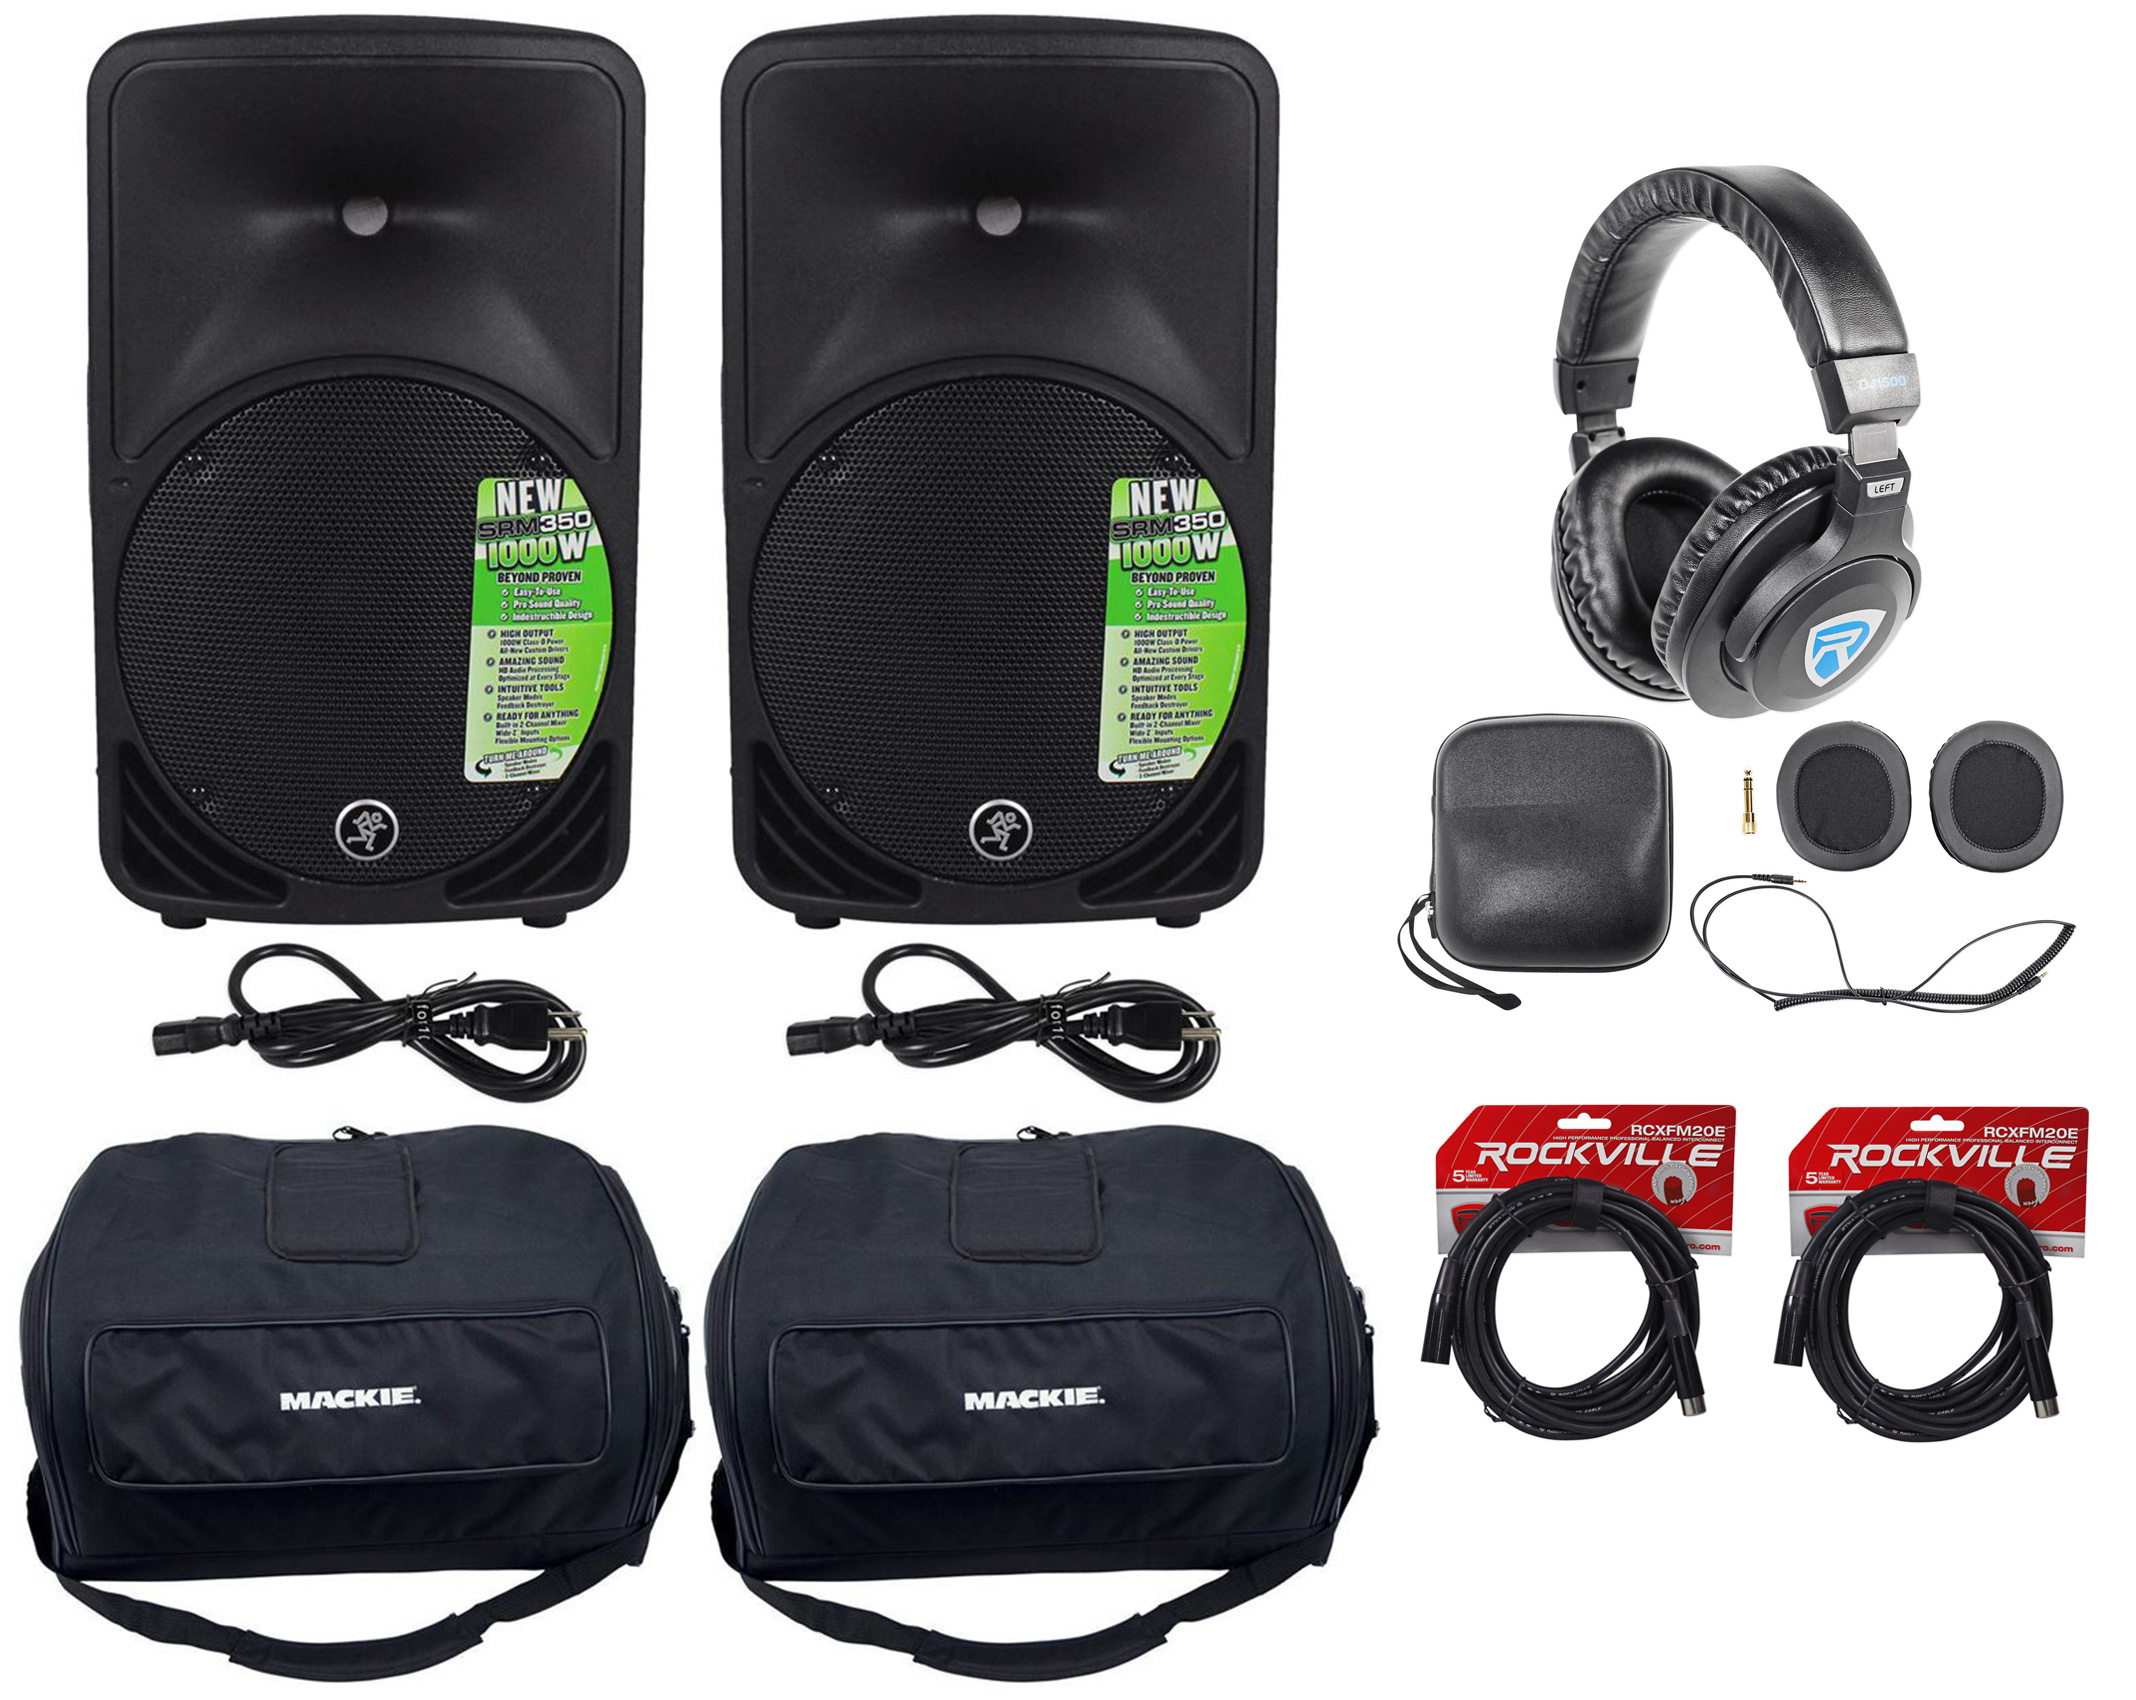 (2) New Mackie SRM350-V3 10" Powered Speakers+Travel Bags+Headphones+Cables